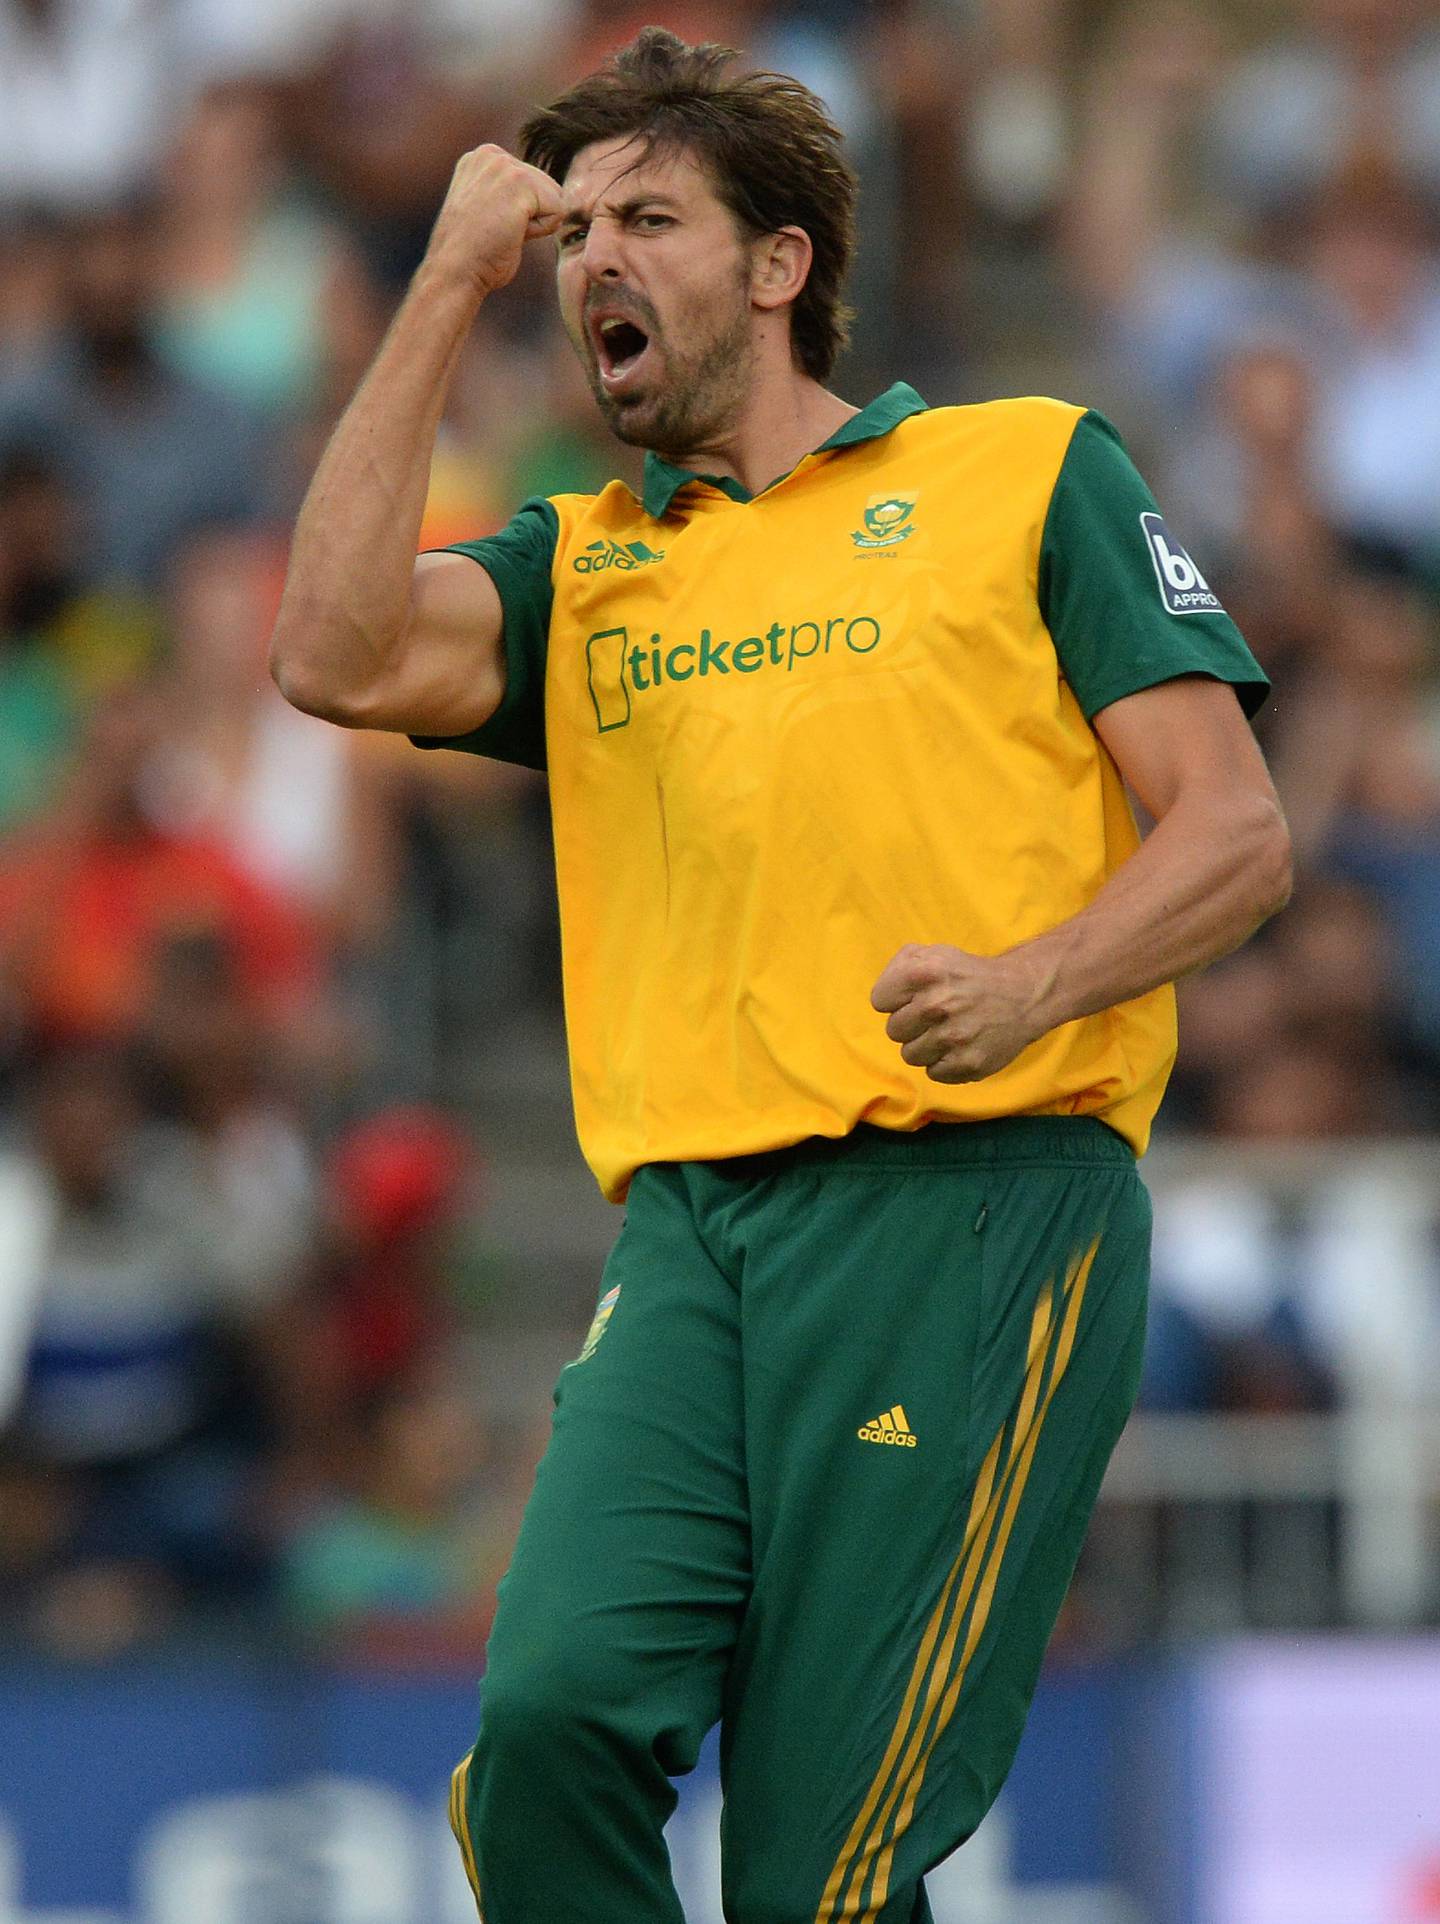 David Wiese celebrates taking a wicket for South Africa during a T20 International against West Indies at Wanderers Stadium on January 11, 2015 in Cape Town, South Africa. Getty Images